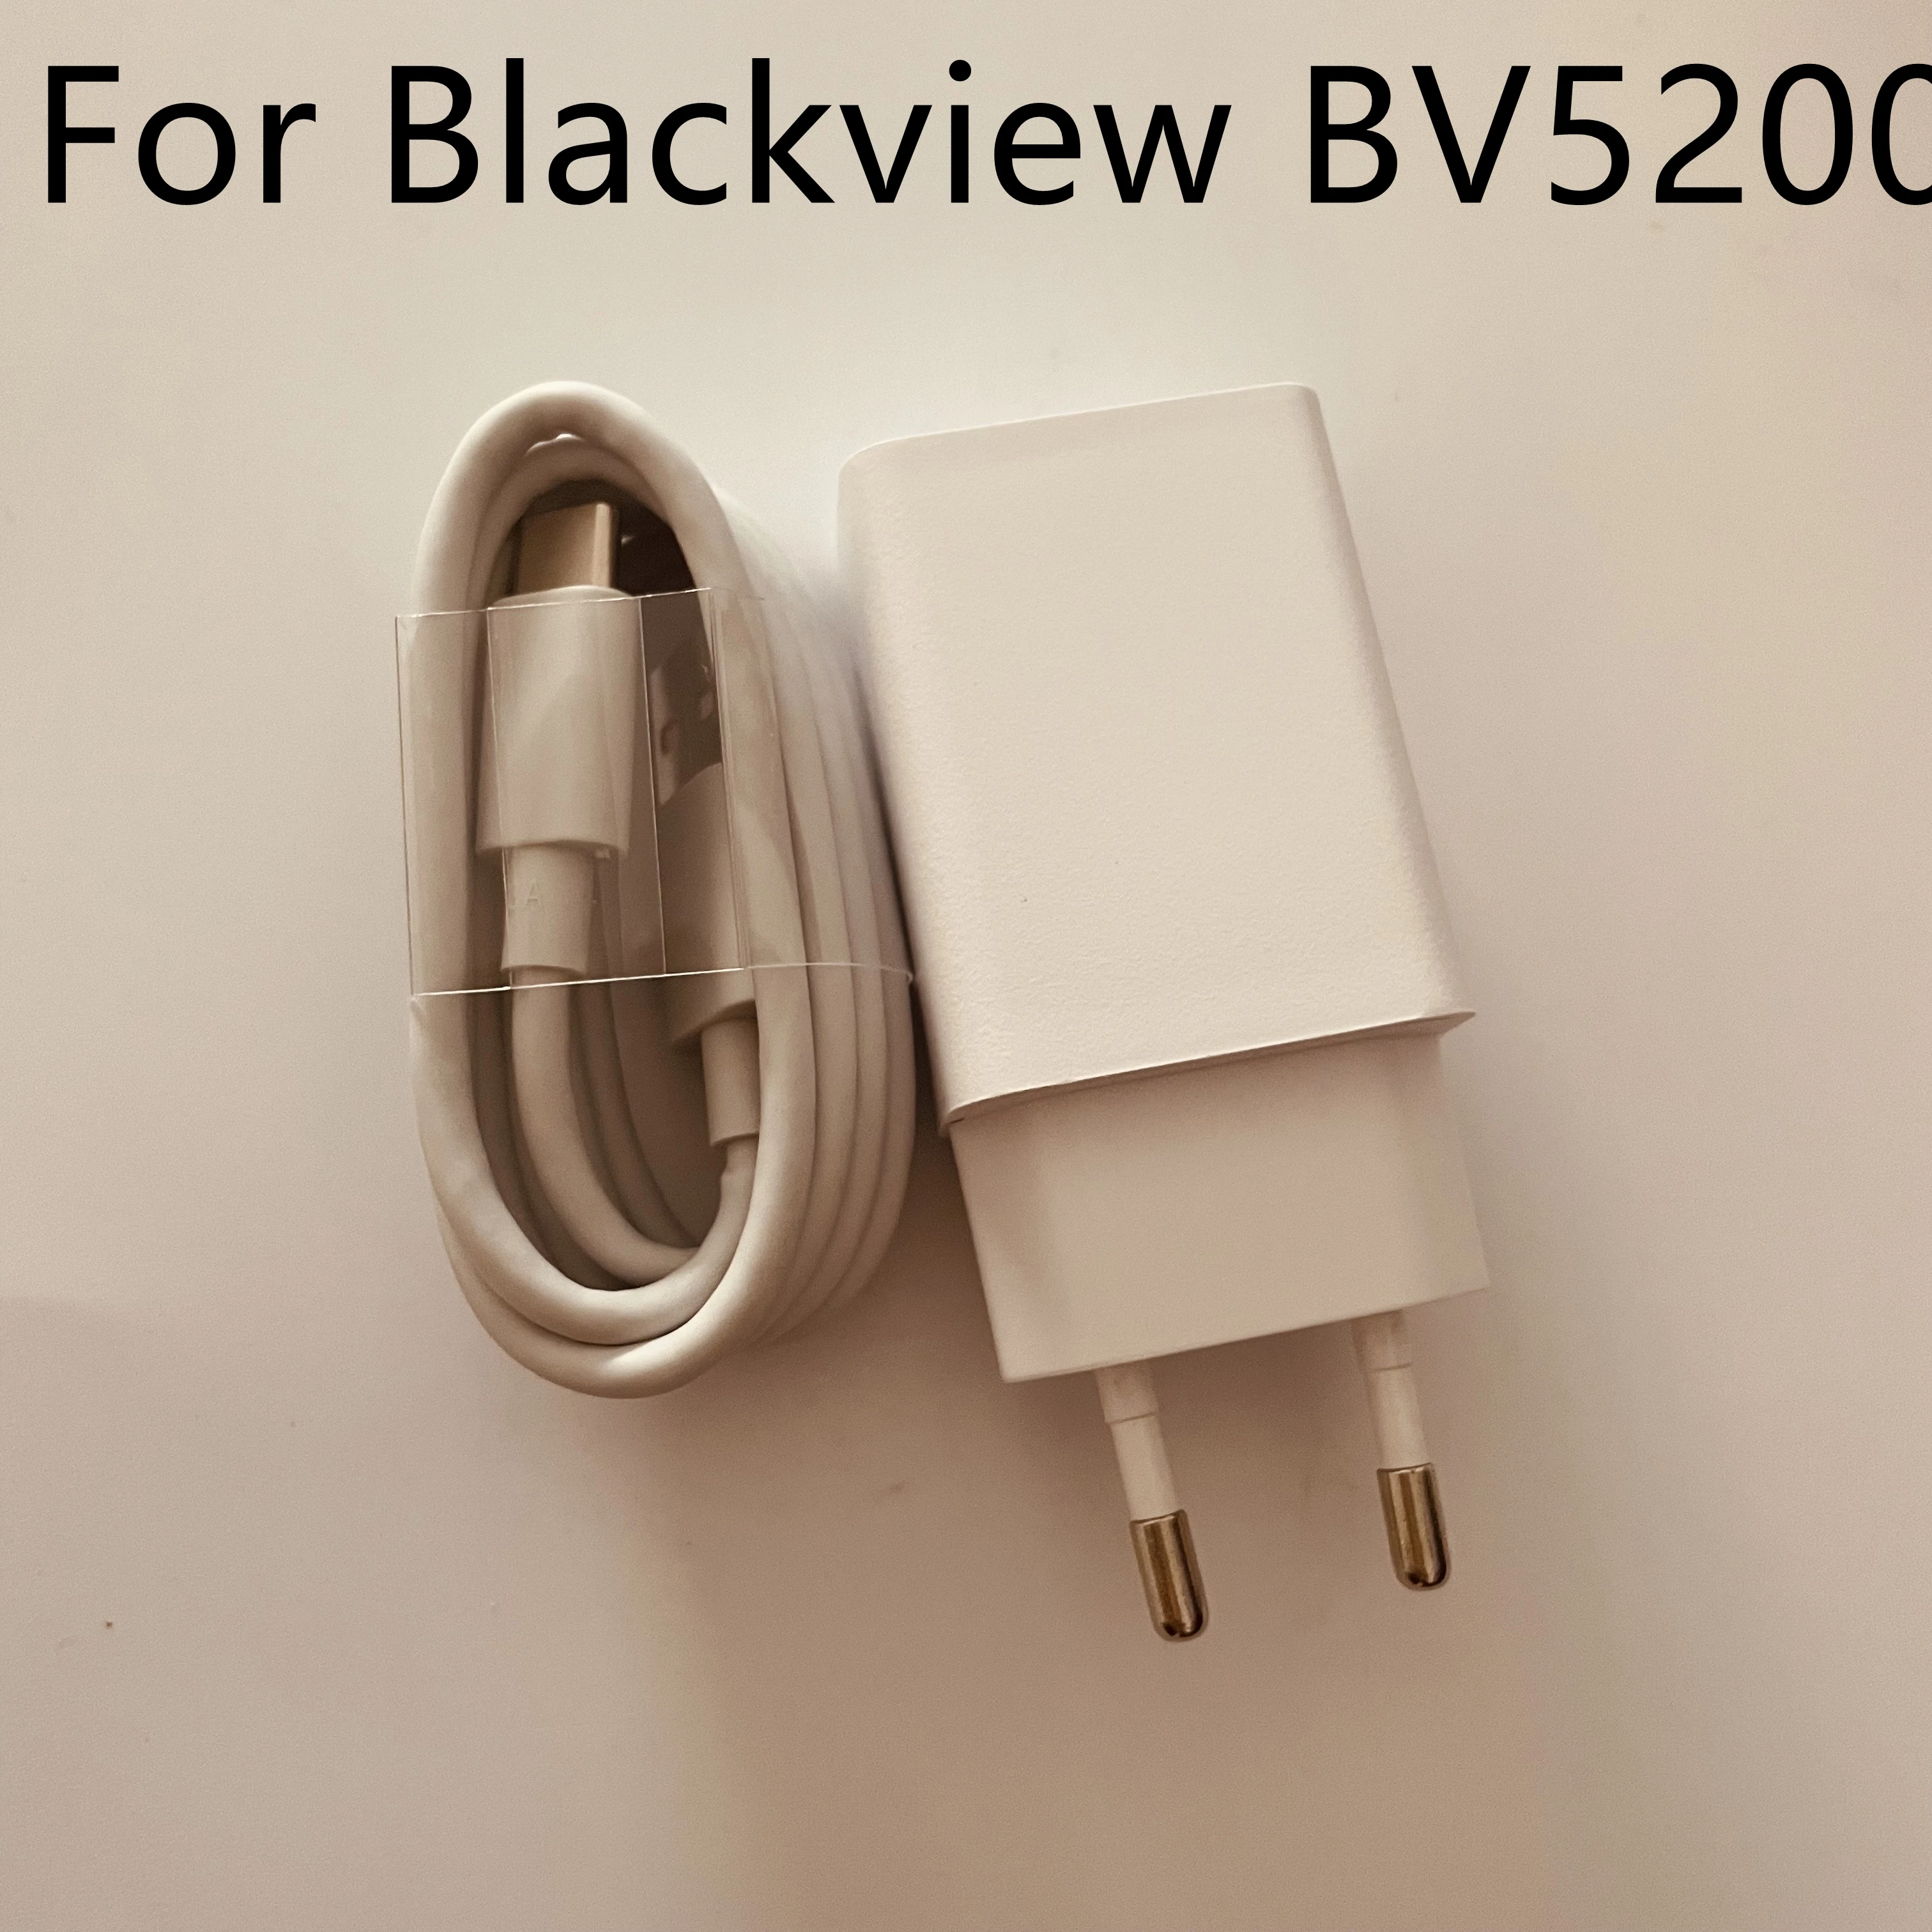 

Blackview BV5200 New Original Travel Charger + Type-C Cable For Blackview BV5200 Pro Smartphone Free Shipping